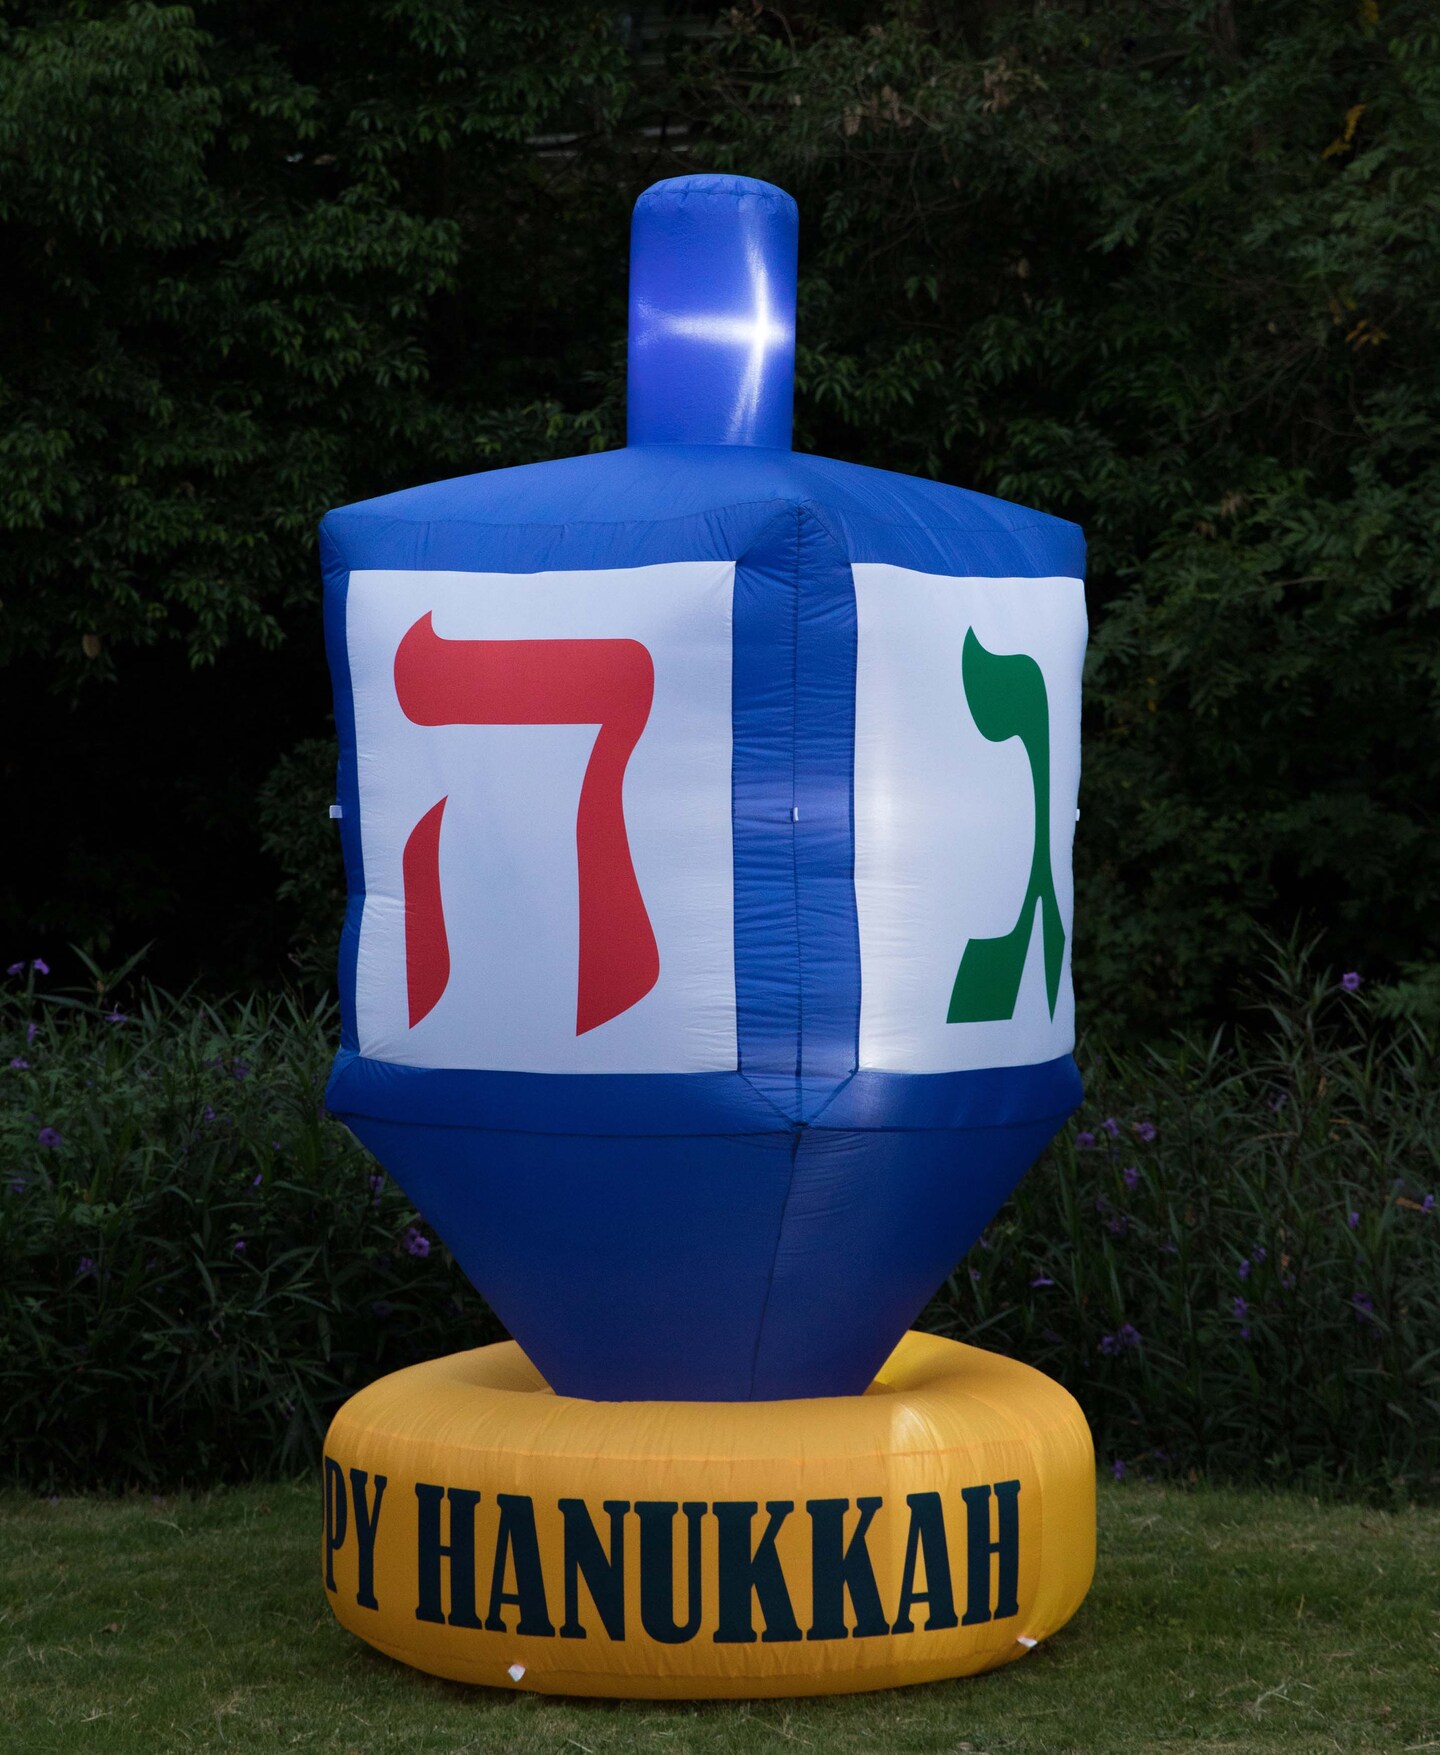 Giant Hanukkah Inflatable Dreidel - Yard Decor with Built-in Bulbs, Tie-Down Points, and Powerful Built in Fan